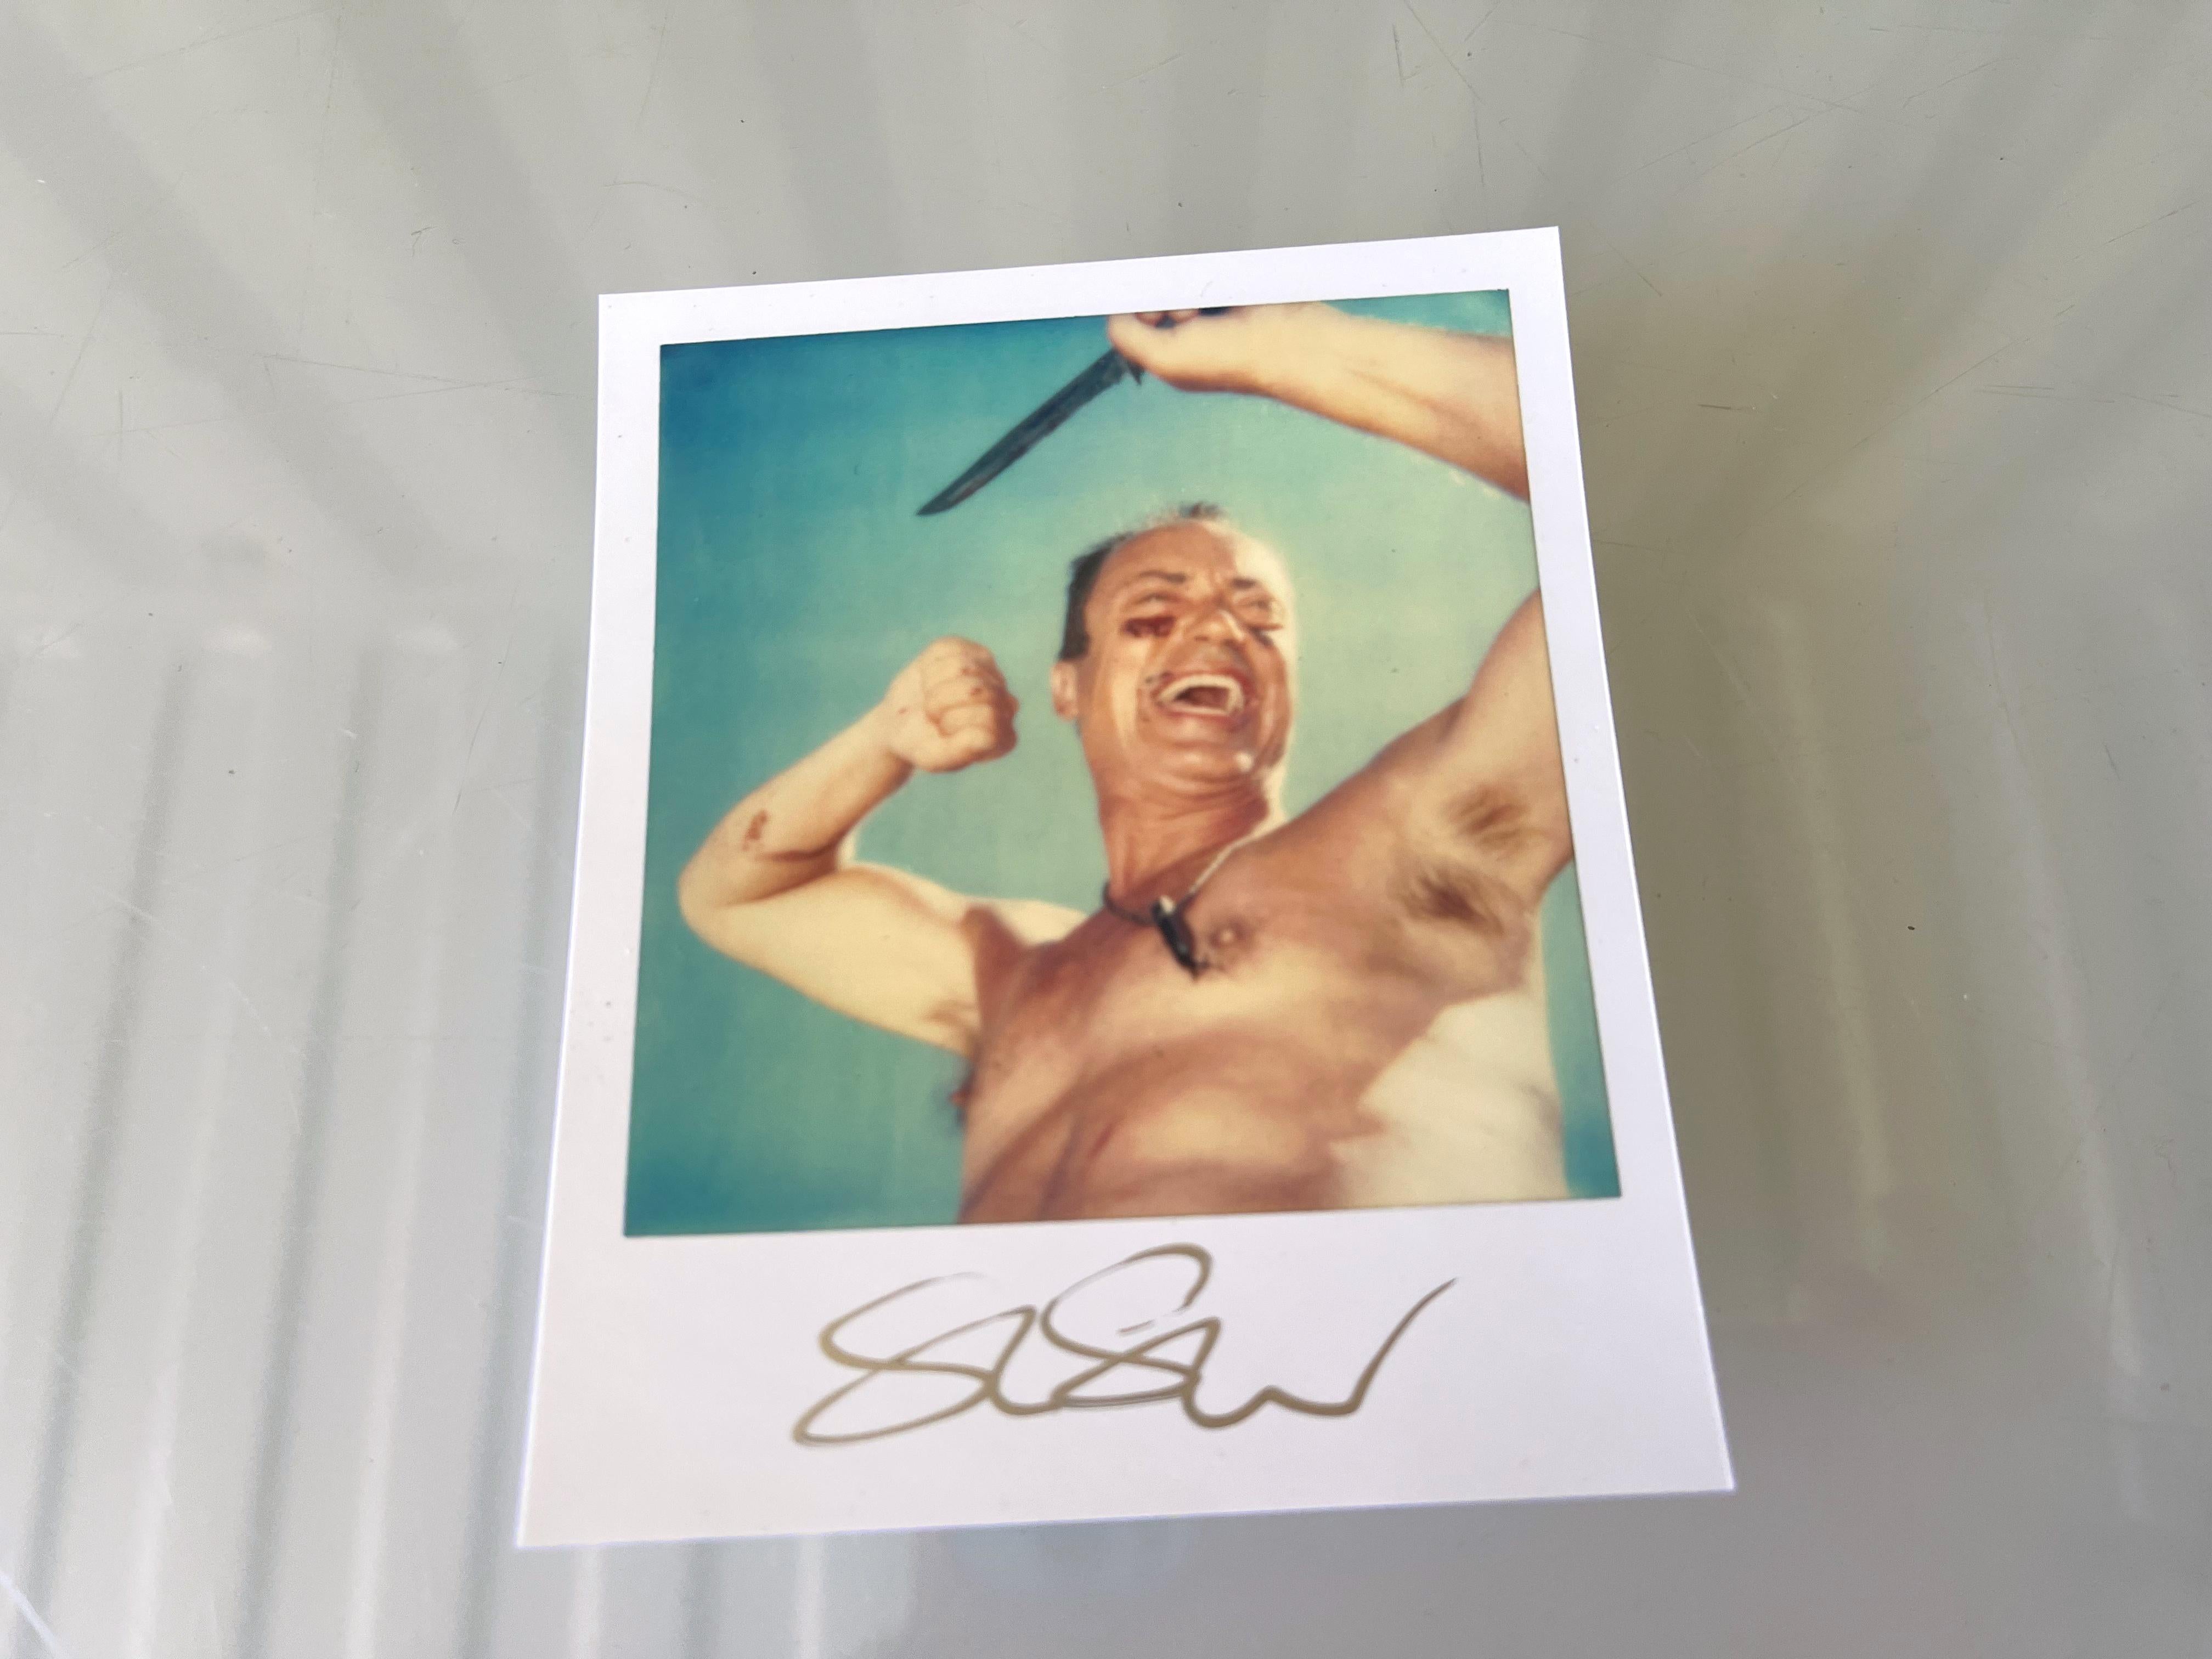 Stefanie Schneider's Mini
'Sitting Bull' from the movie Immaculate Springs - 1996
featuring Udo Kier

signed in front, not mounted. 
Digital Color Photographs based on the Polaroid. 

Polaroid sized open Editions 1998-2023
10.7 x 8.8cm (Image